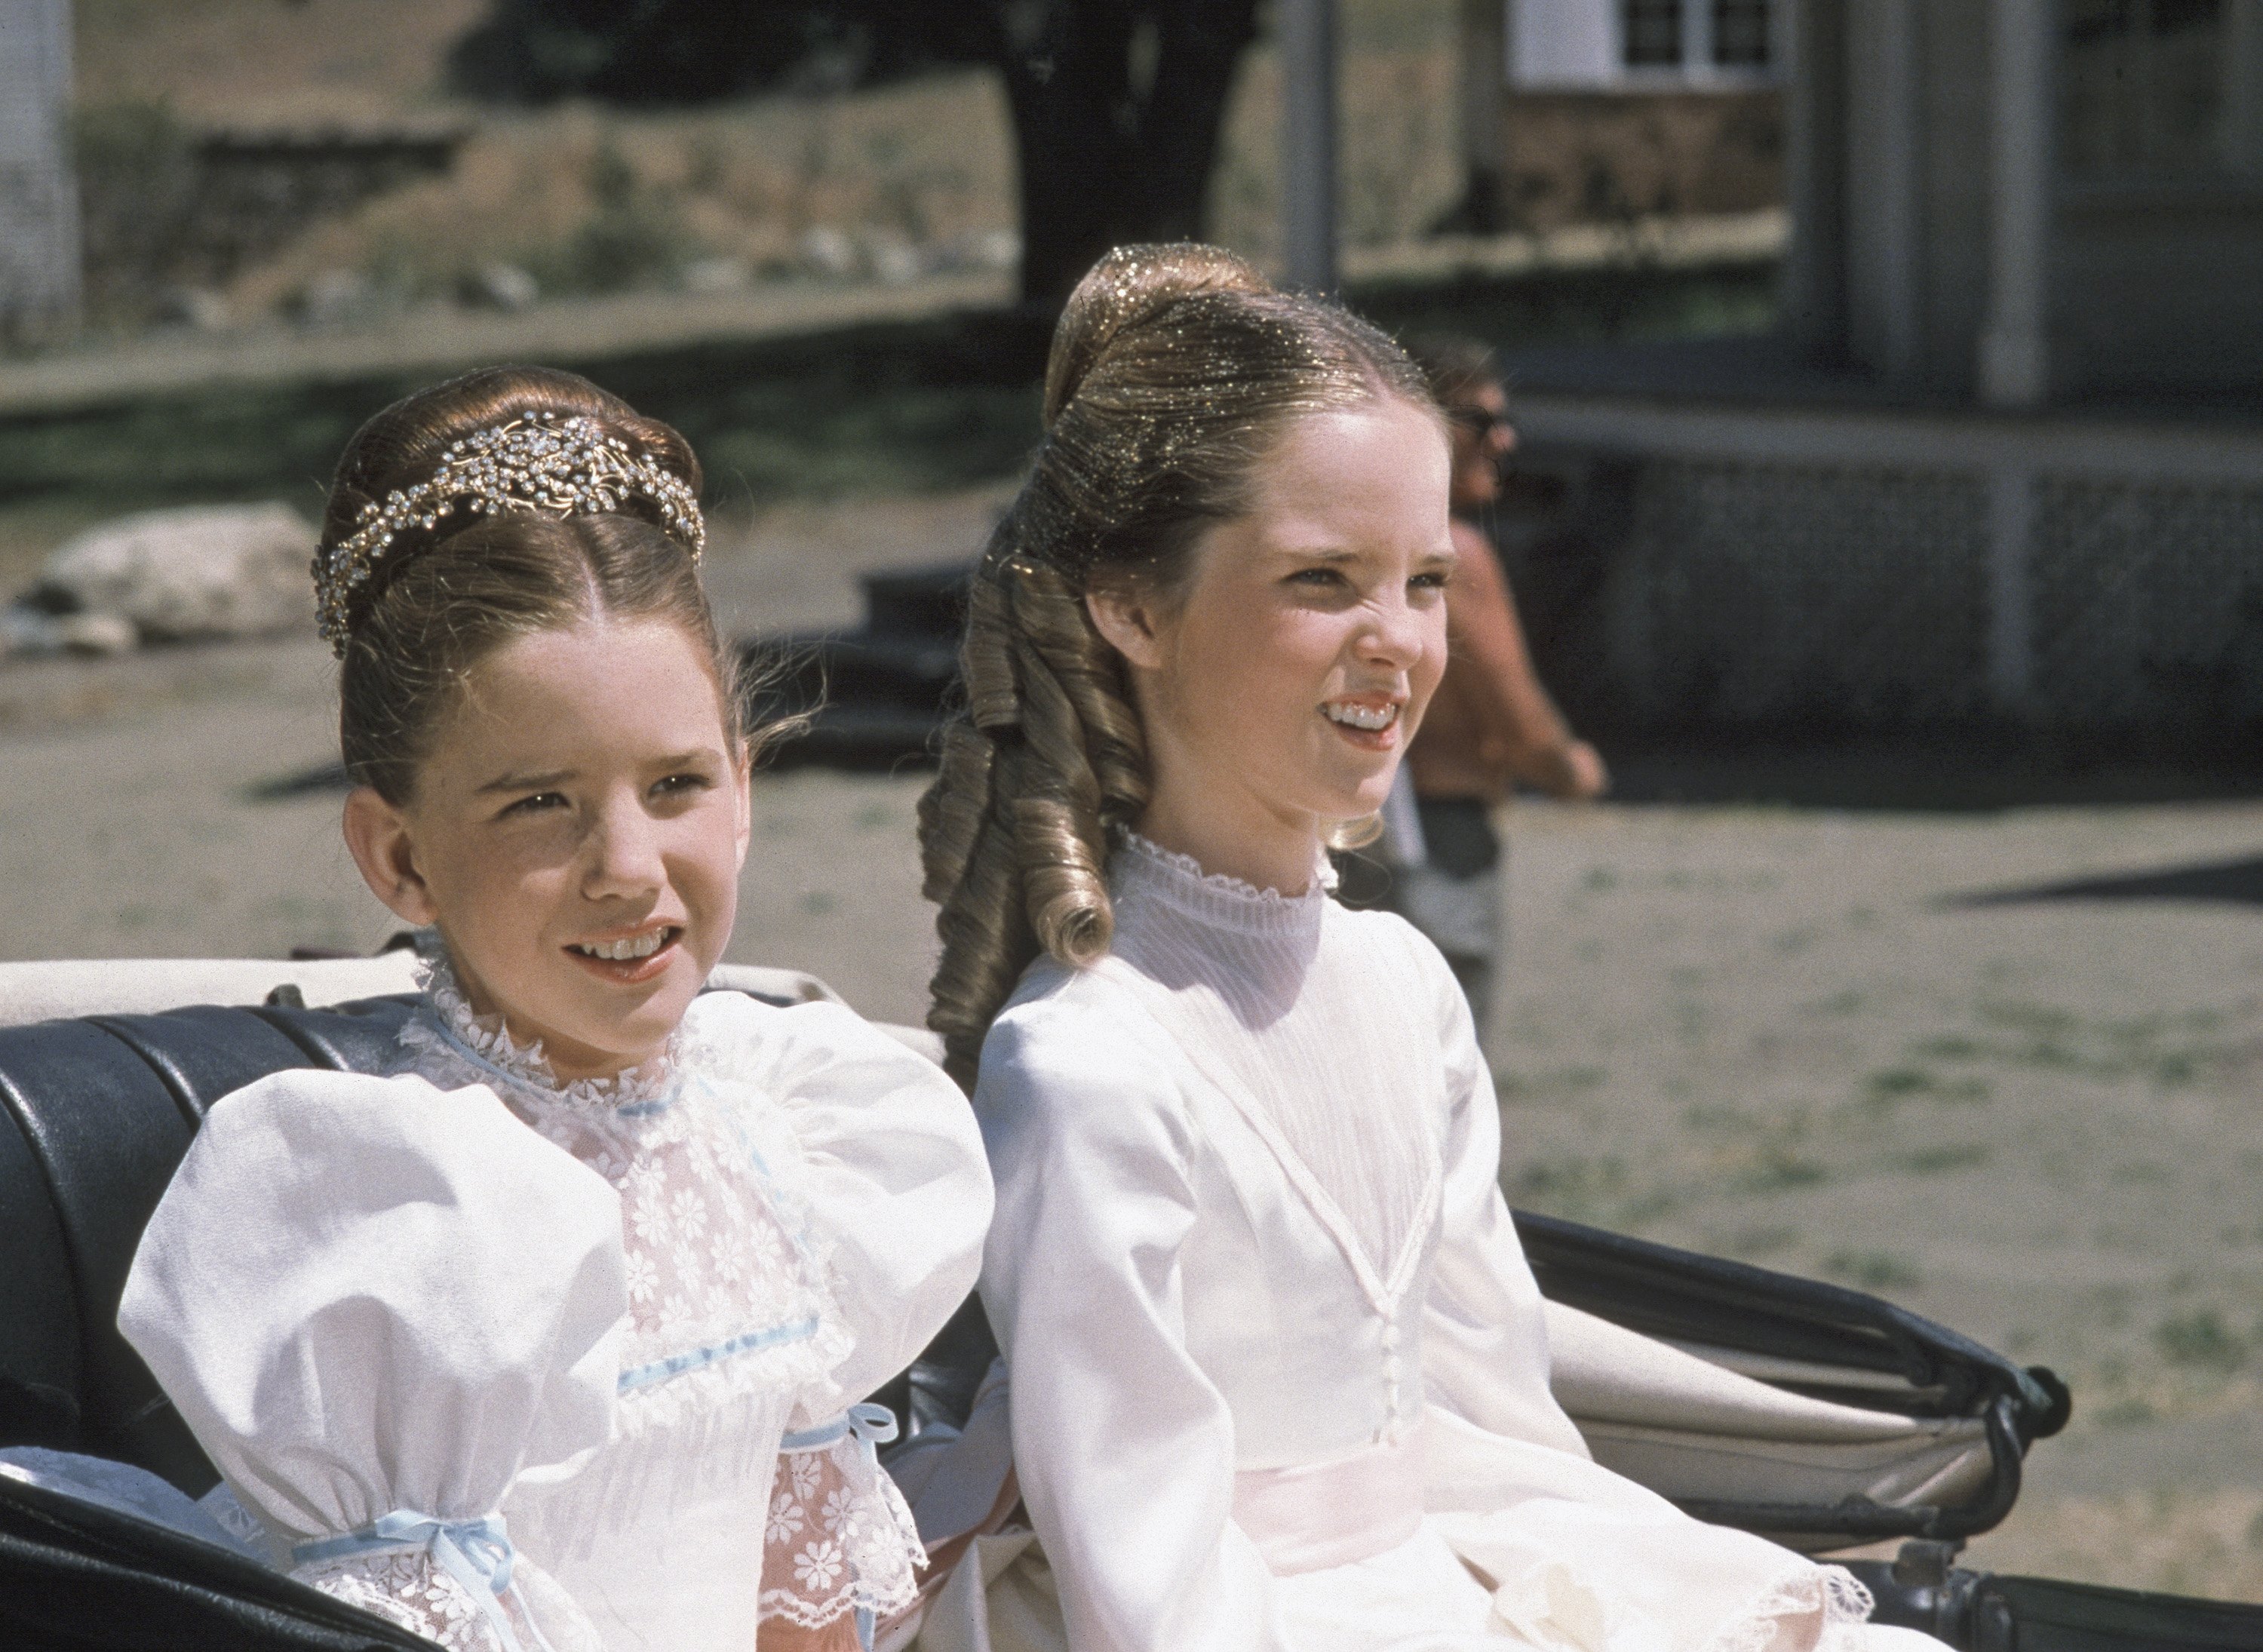 Melissa Gilbert and Melissa Sue Anderson on set at 'Little House on the Prairie.' The TV sisters are dressed in white dresses sitting in a carriage.